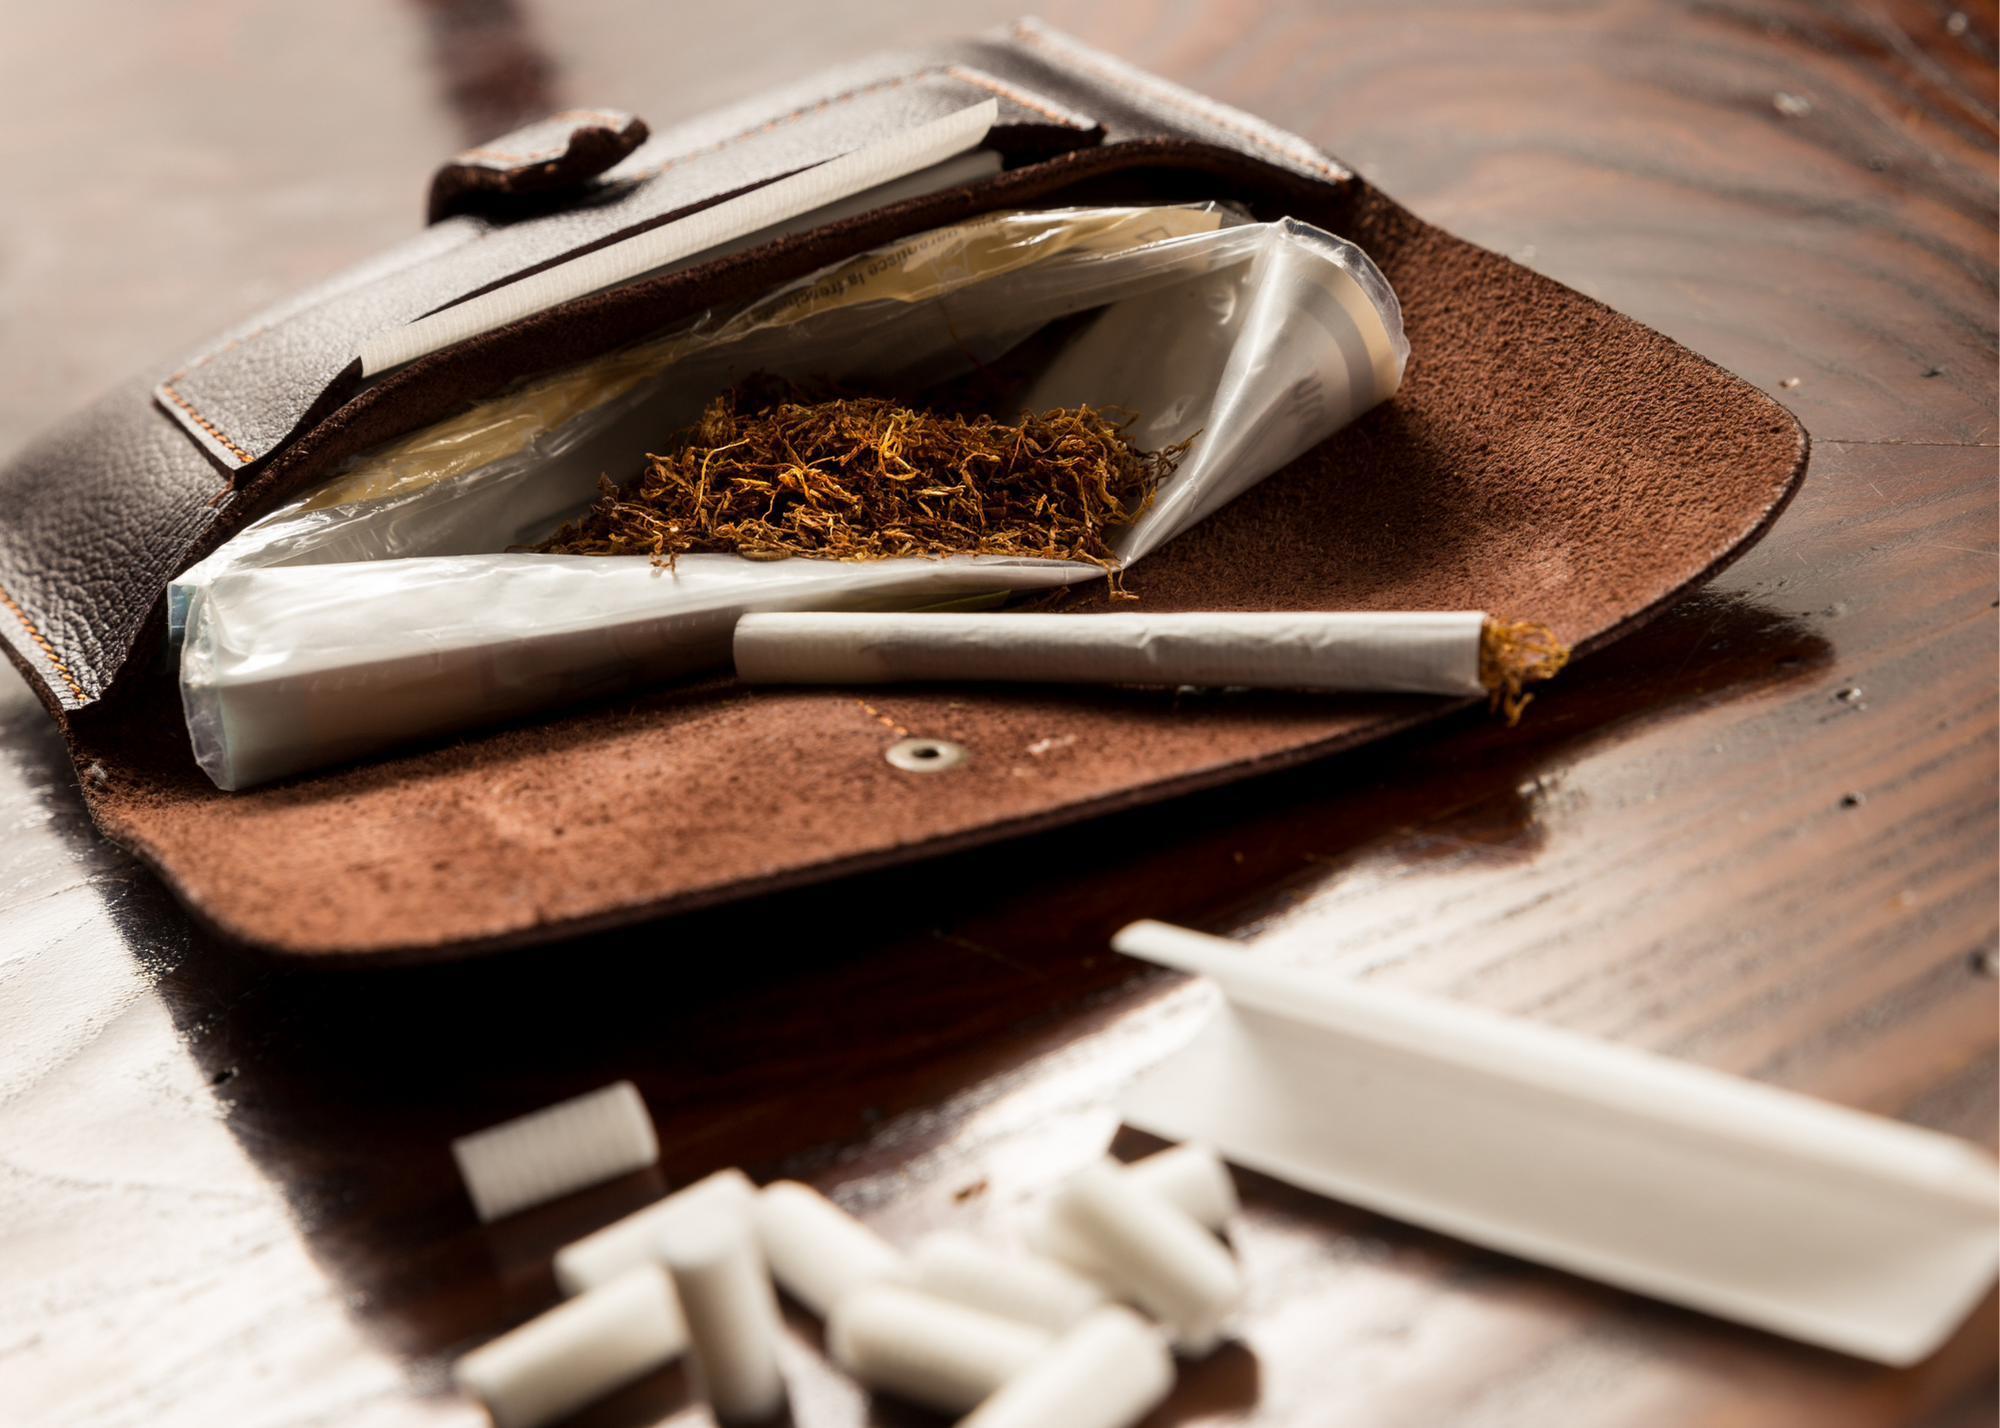 Are nicotine pouches safe? What X Research Studies Say